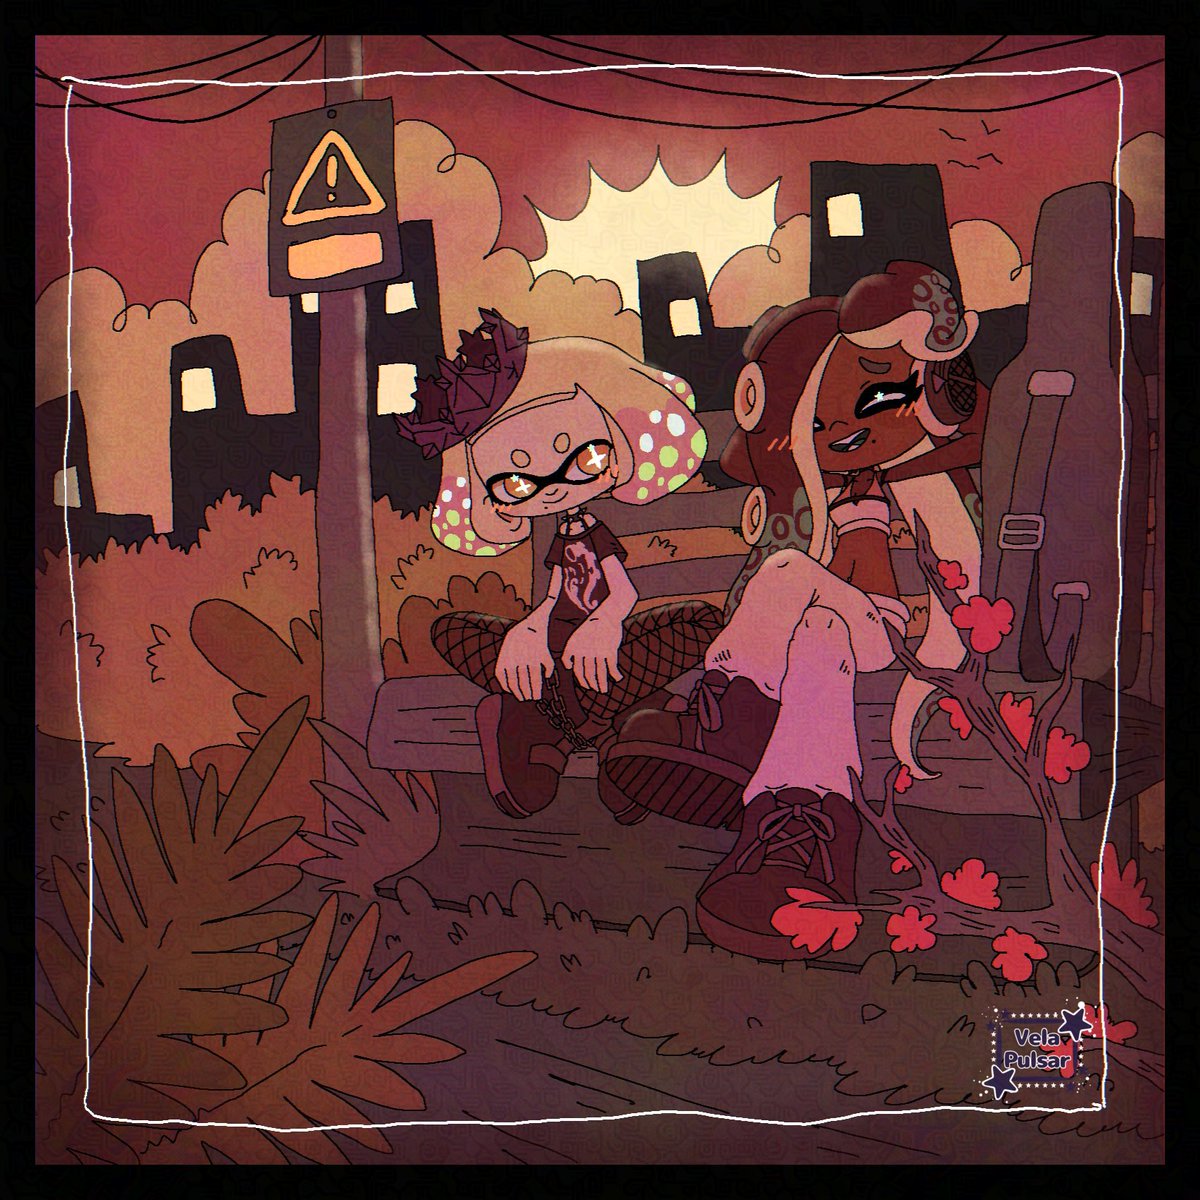 New drawing style!
(Pearl and Marina just chilling in an abandoned park)

#Splatoon2 #Splatoon3 #スプラトゥーン2 #スプラトゥーン3 #splatoonart #illustration #イラスト #HumanArtists #ibispaint #art 

▶Feel free to 💜 and RT🔁, is really appreciated... and FOLLOW ME 👉👈~◀